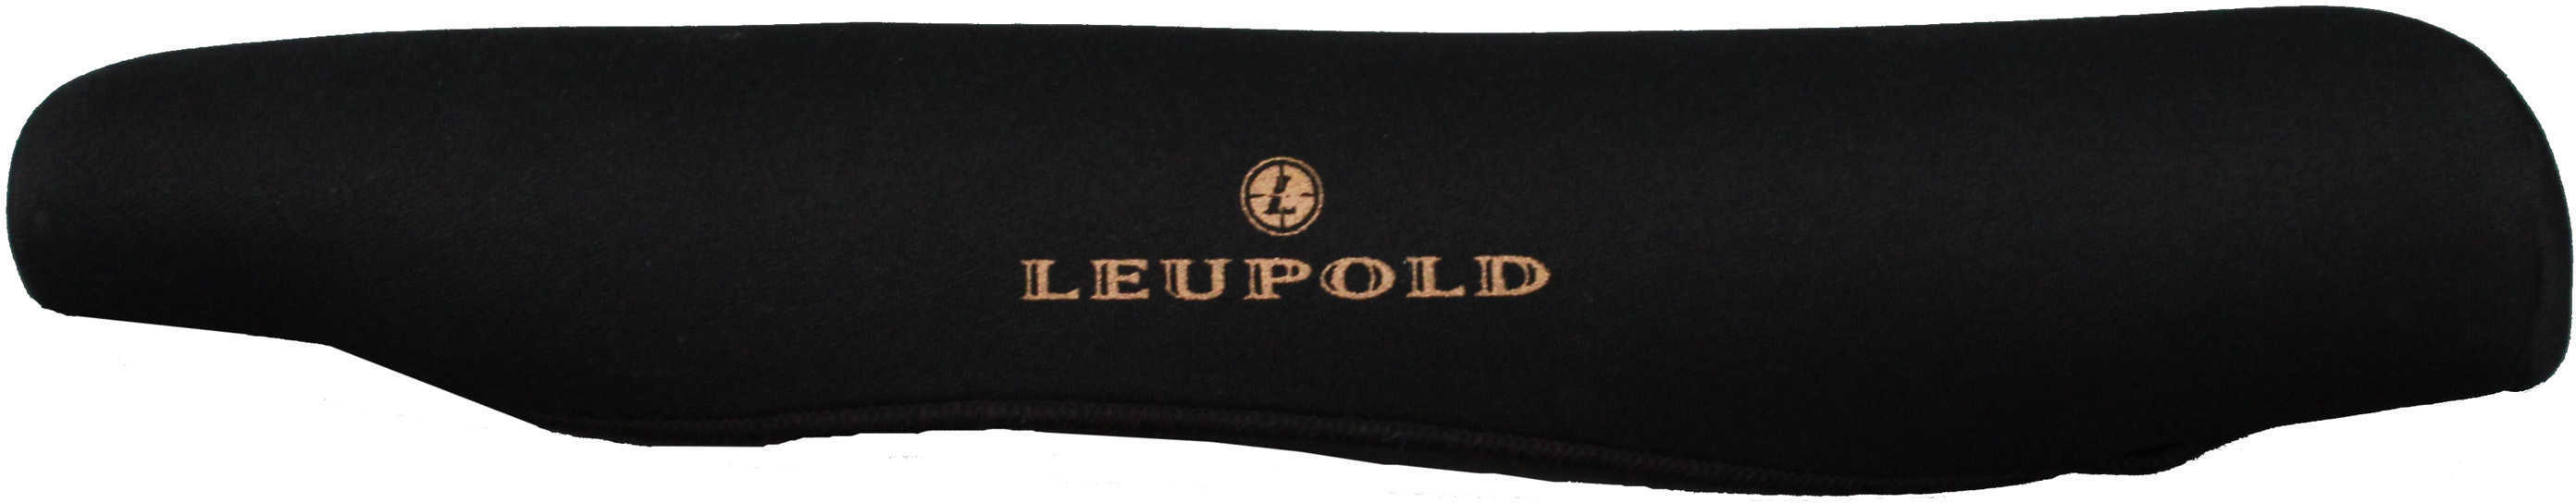 Leupold Scope Cover-Xx-Large